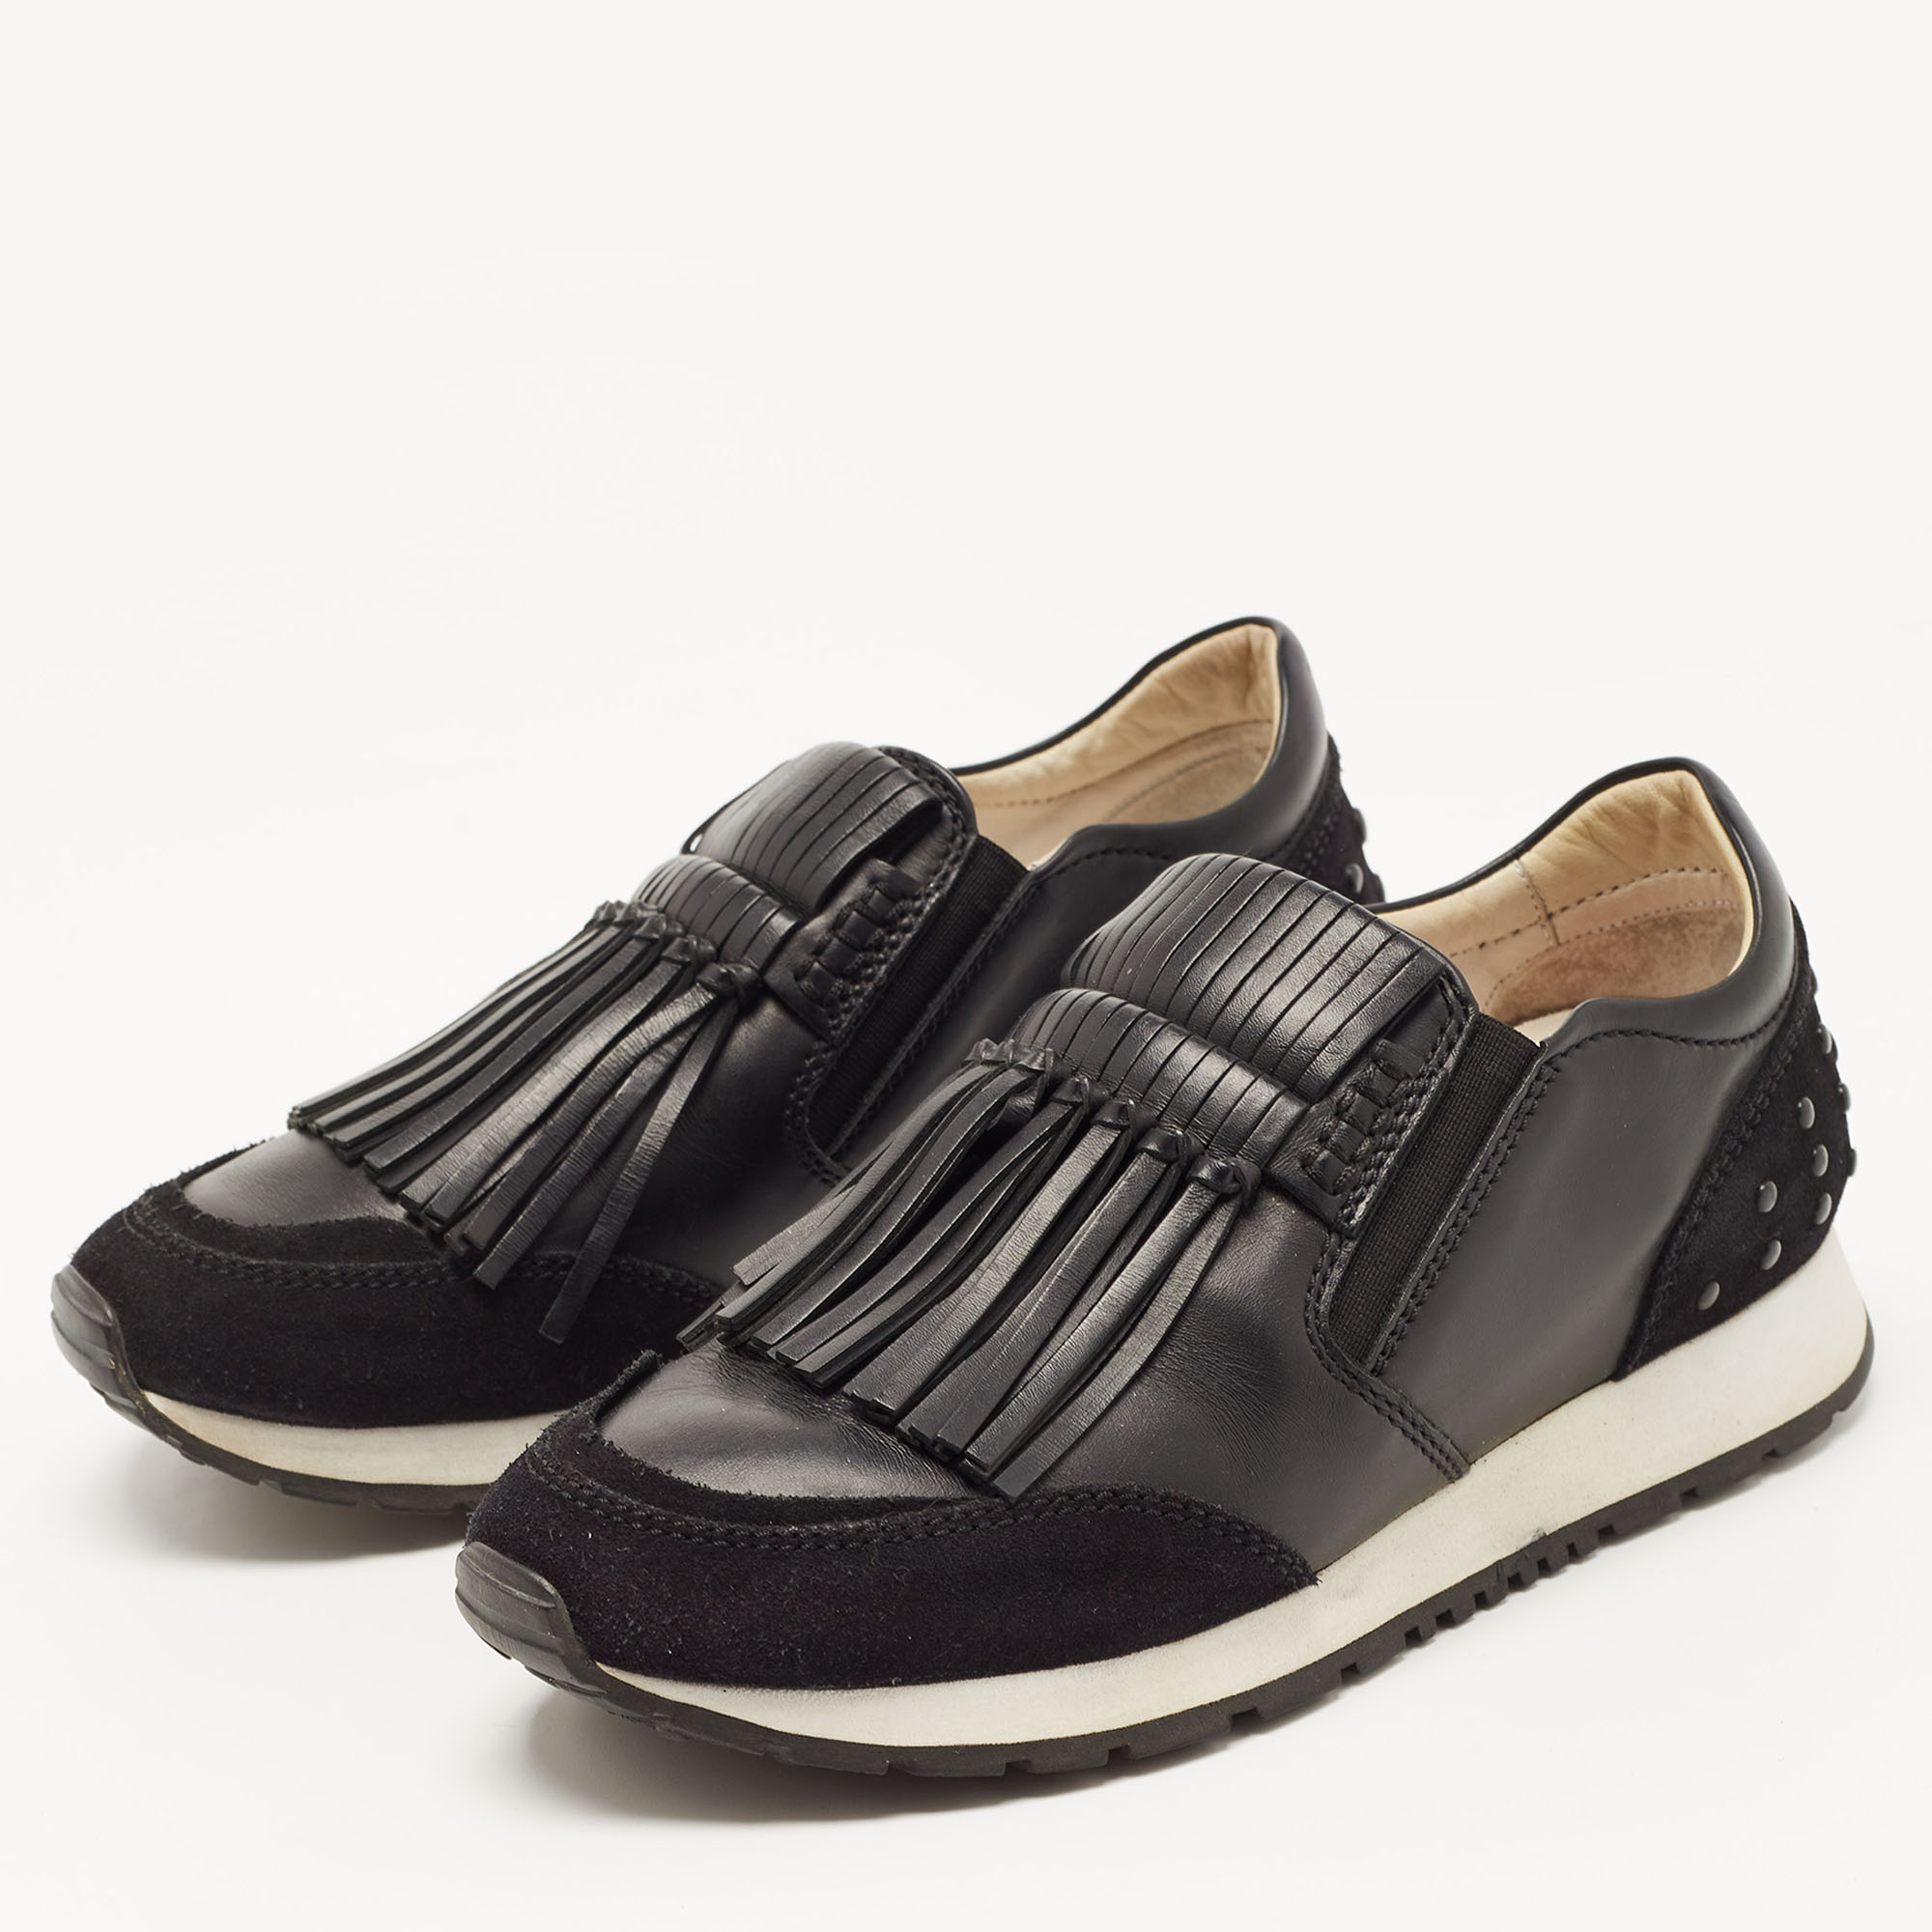 

Tod's Black Suede and Leather Fringe Detail Slip On Sneakers Size